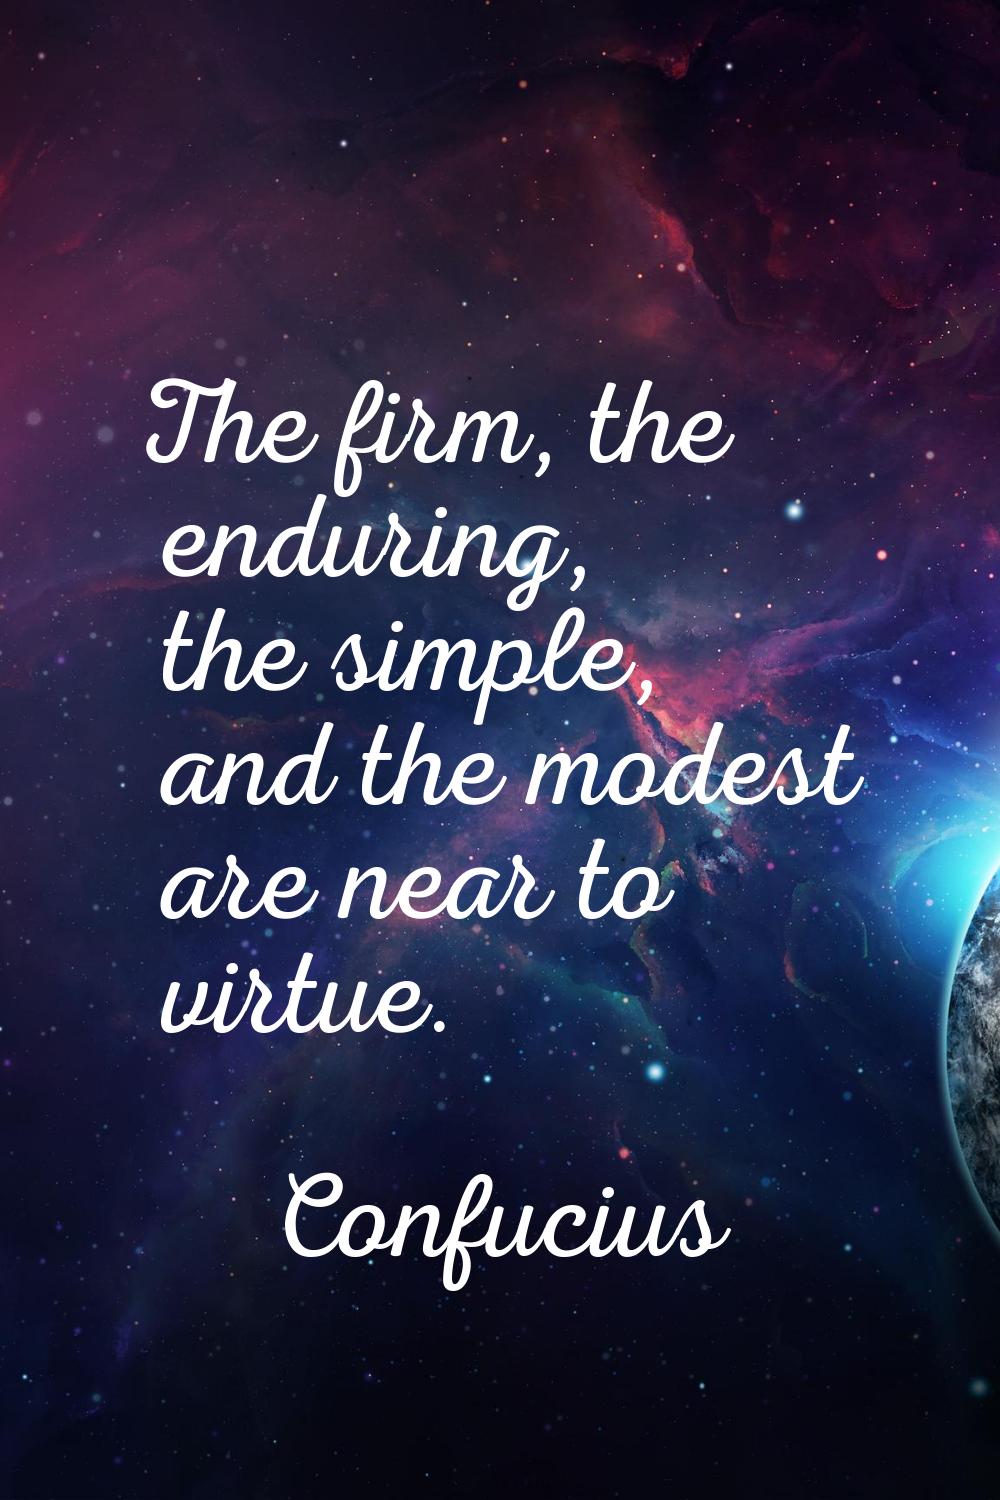 The firm, the enduring, the simple, and the modest are near to virtue.